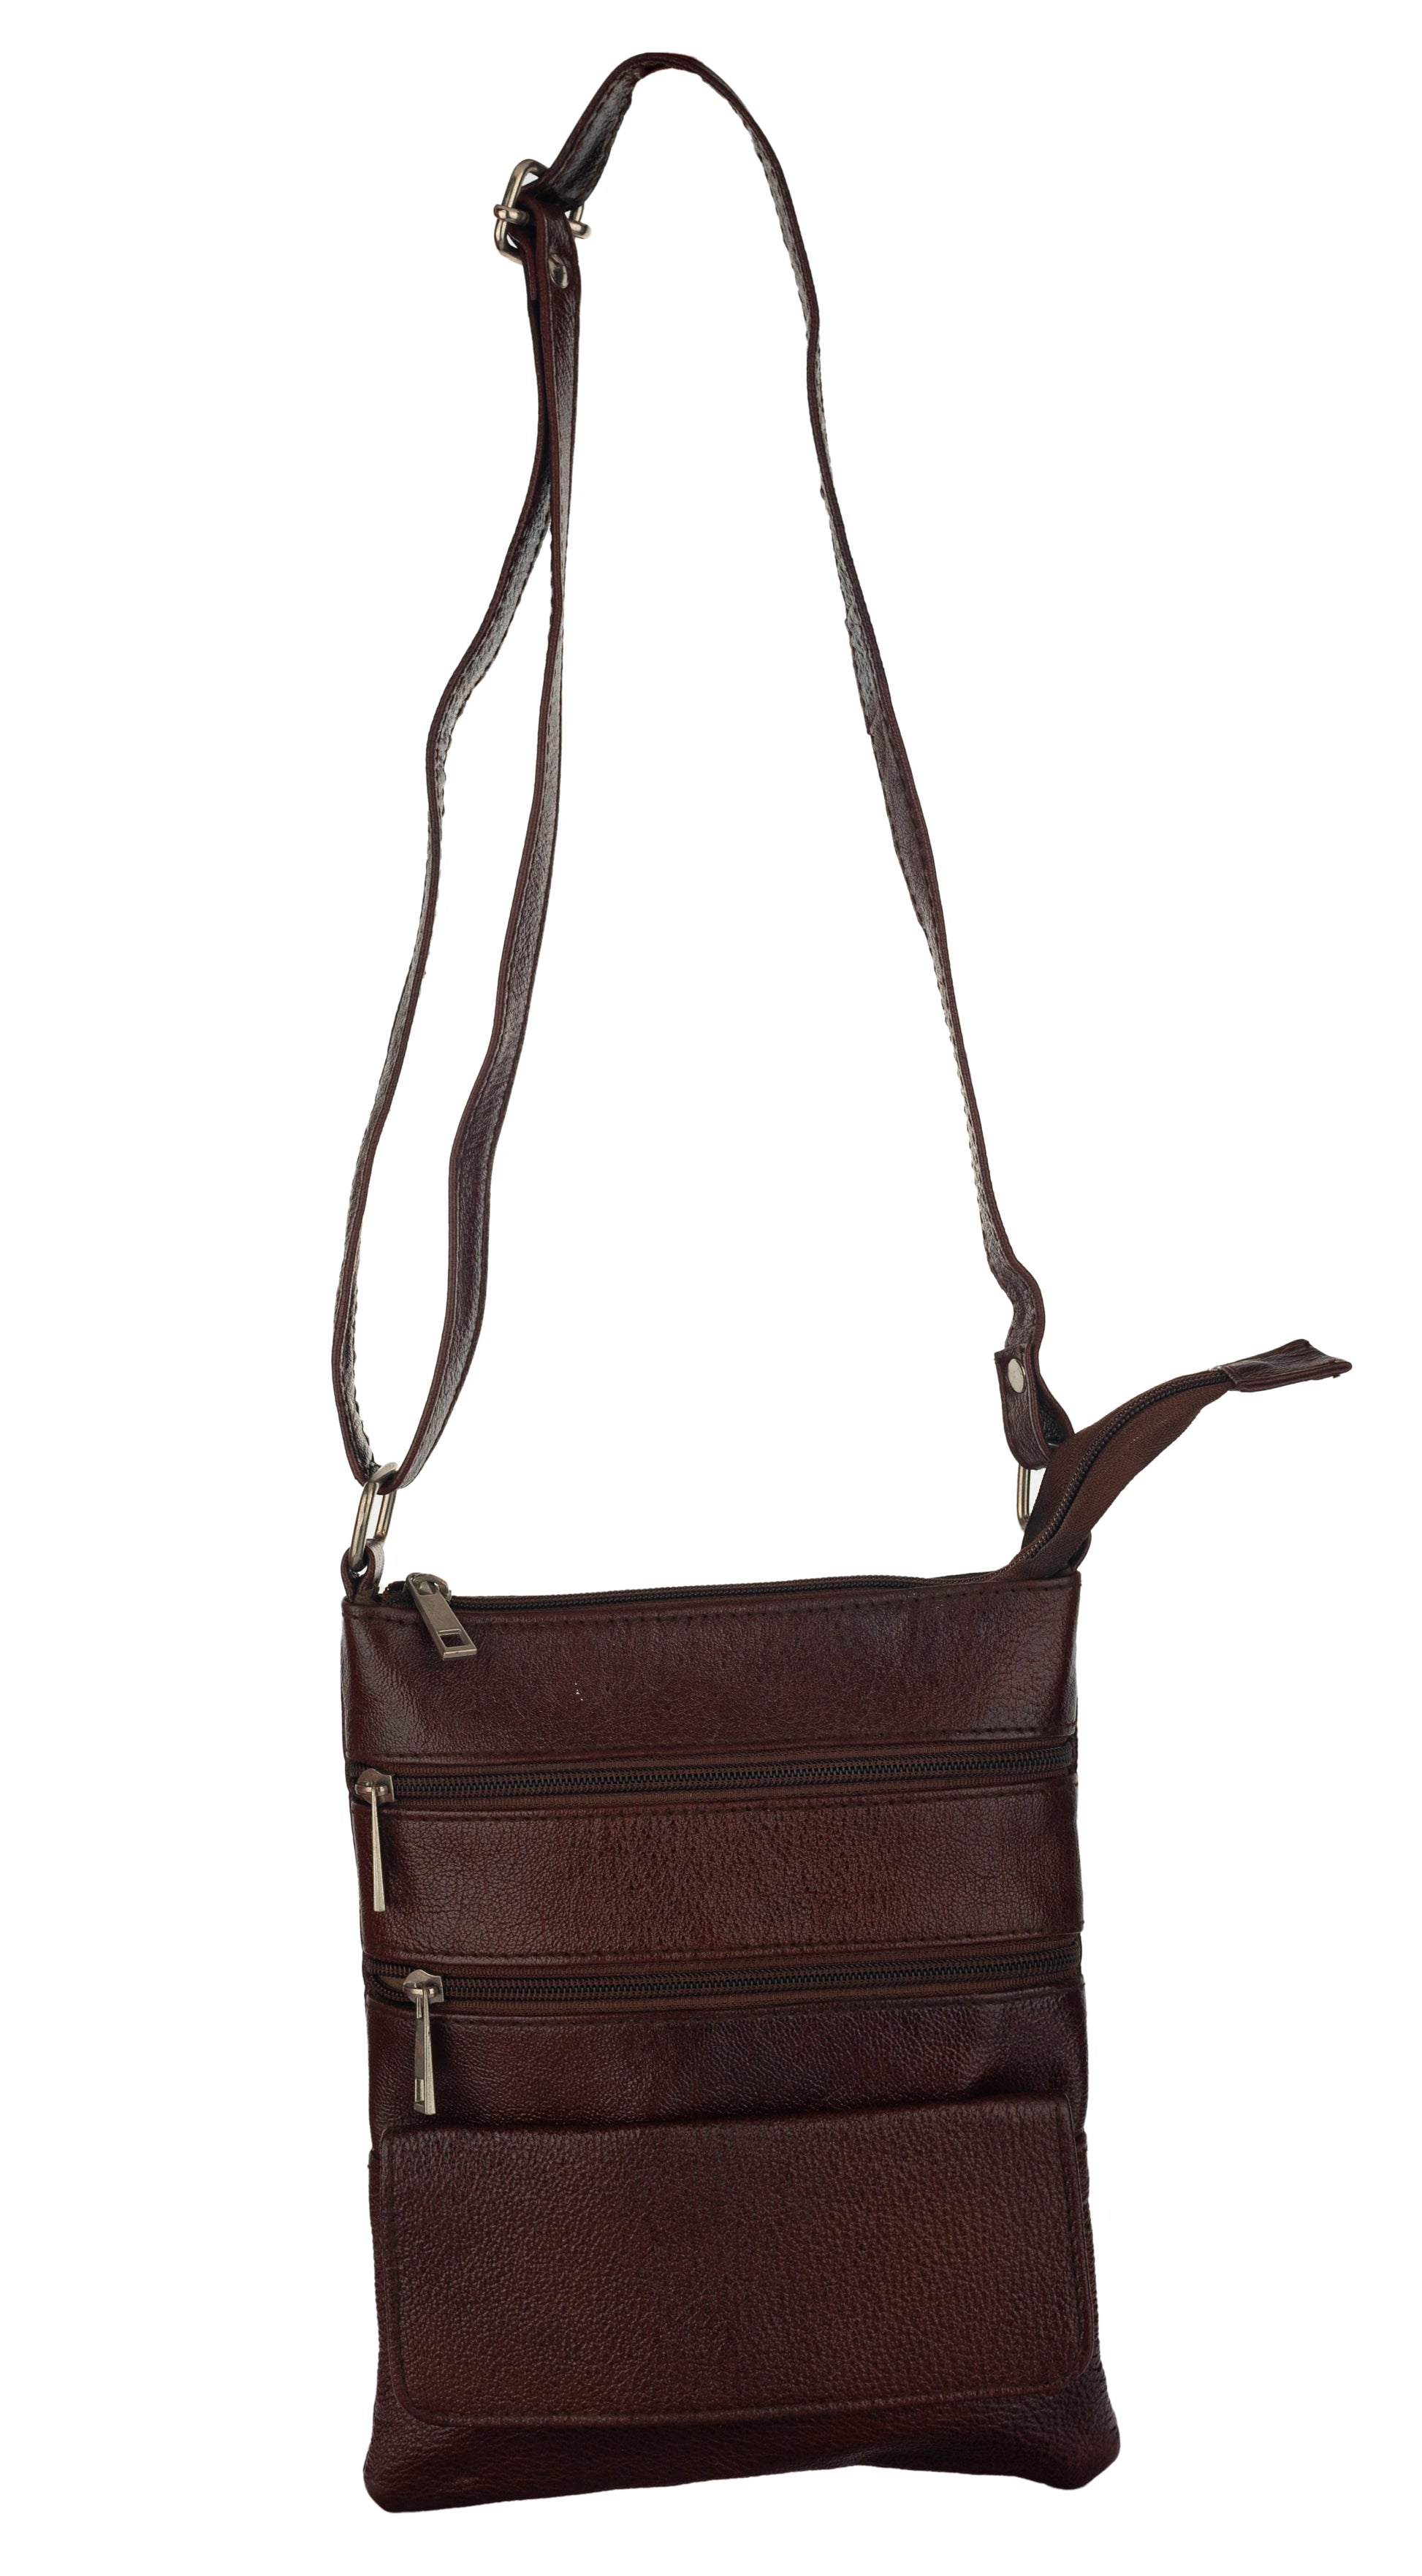 pure-leather-unisex-brown-cross-body-sling-messanger-bag-11-9-mb03